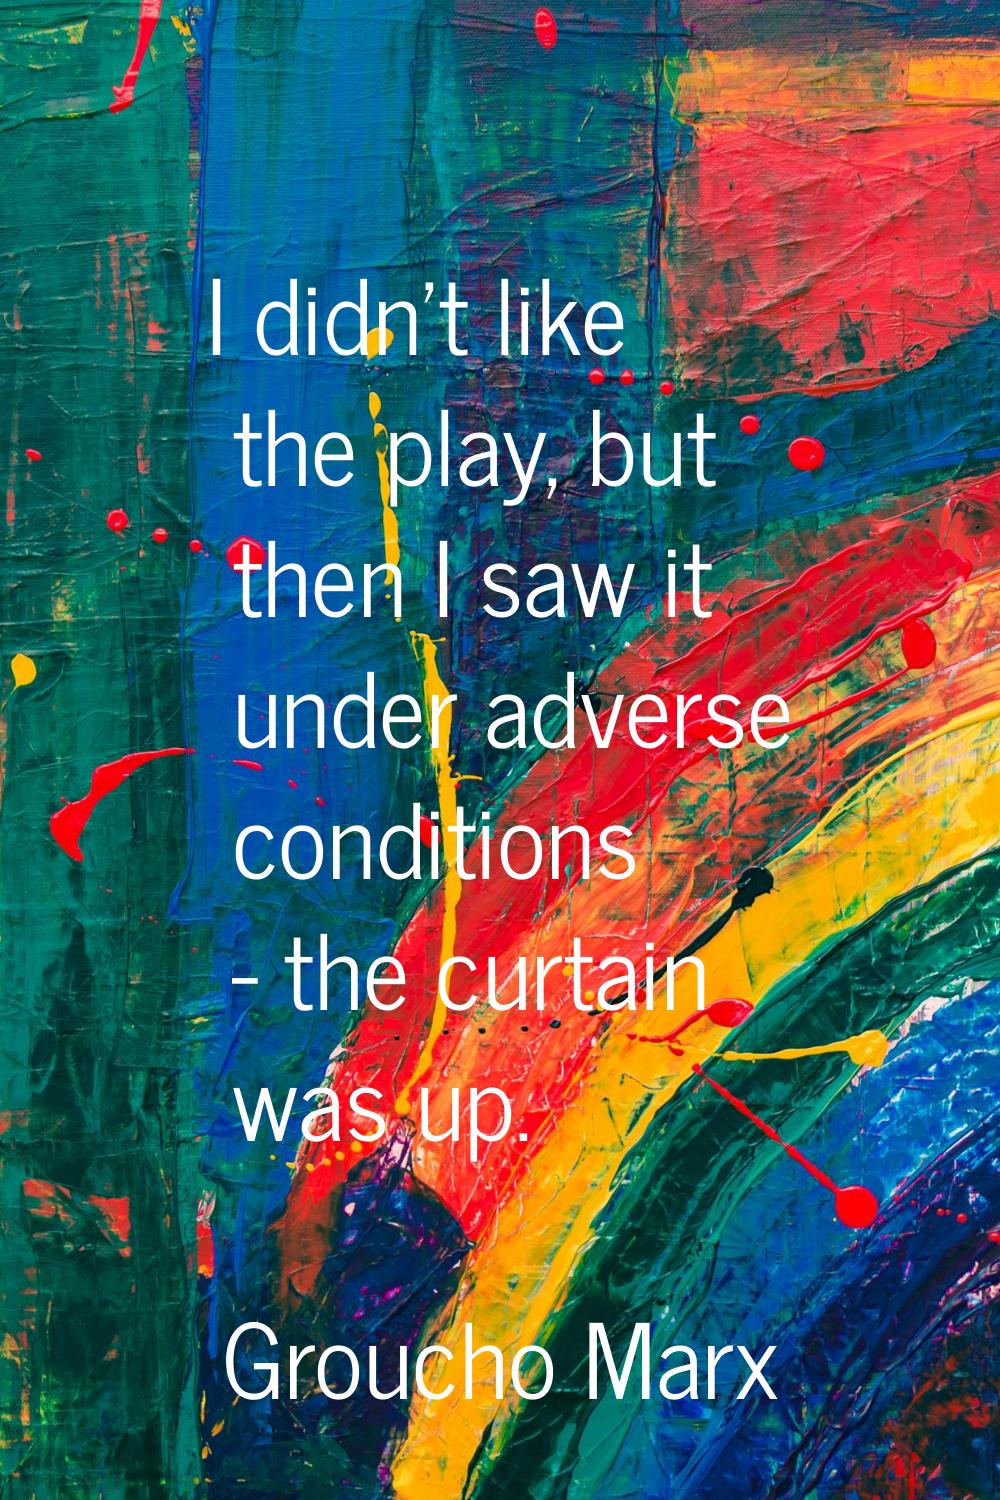 I didn't like the play, but then I saw it under adverse conditions - the curtain was up.